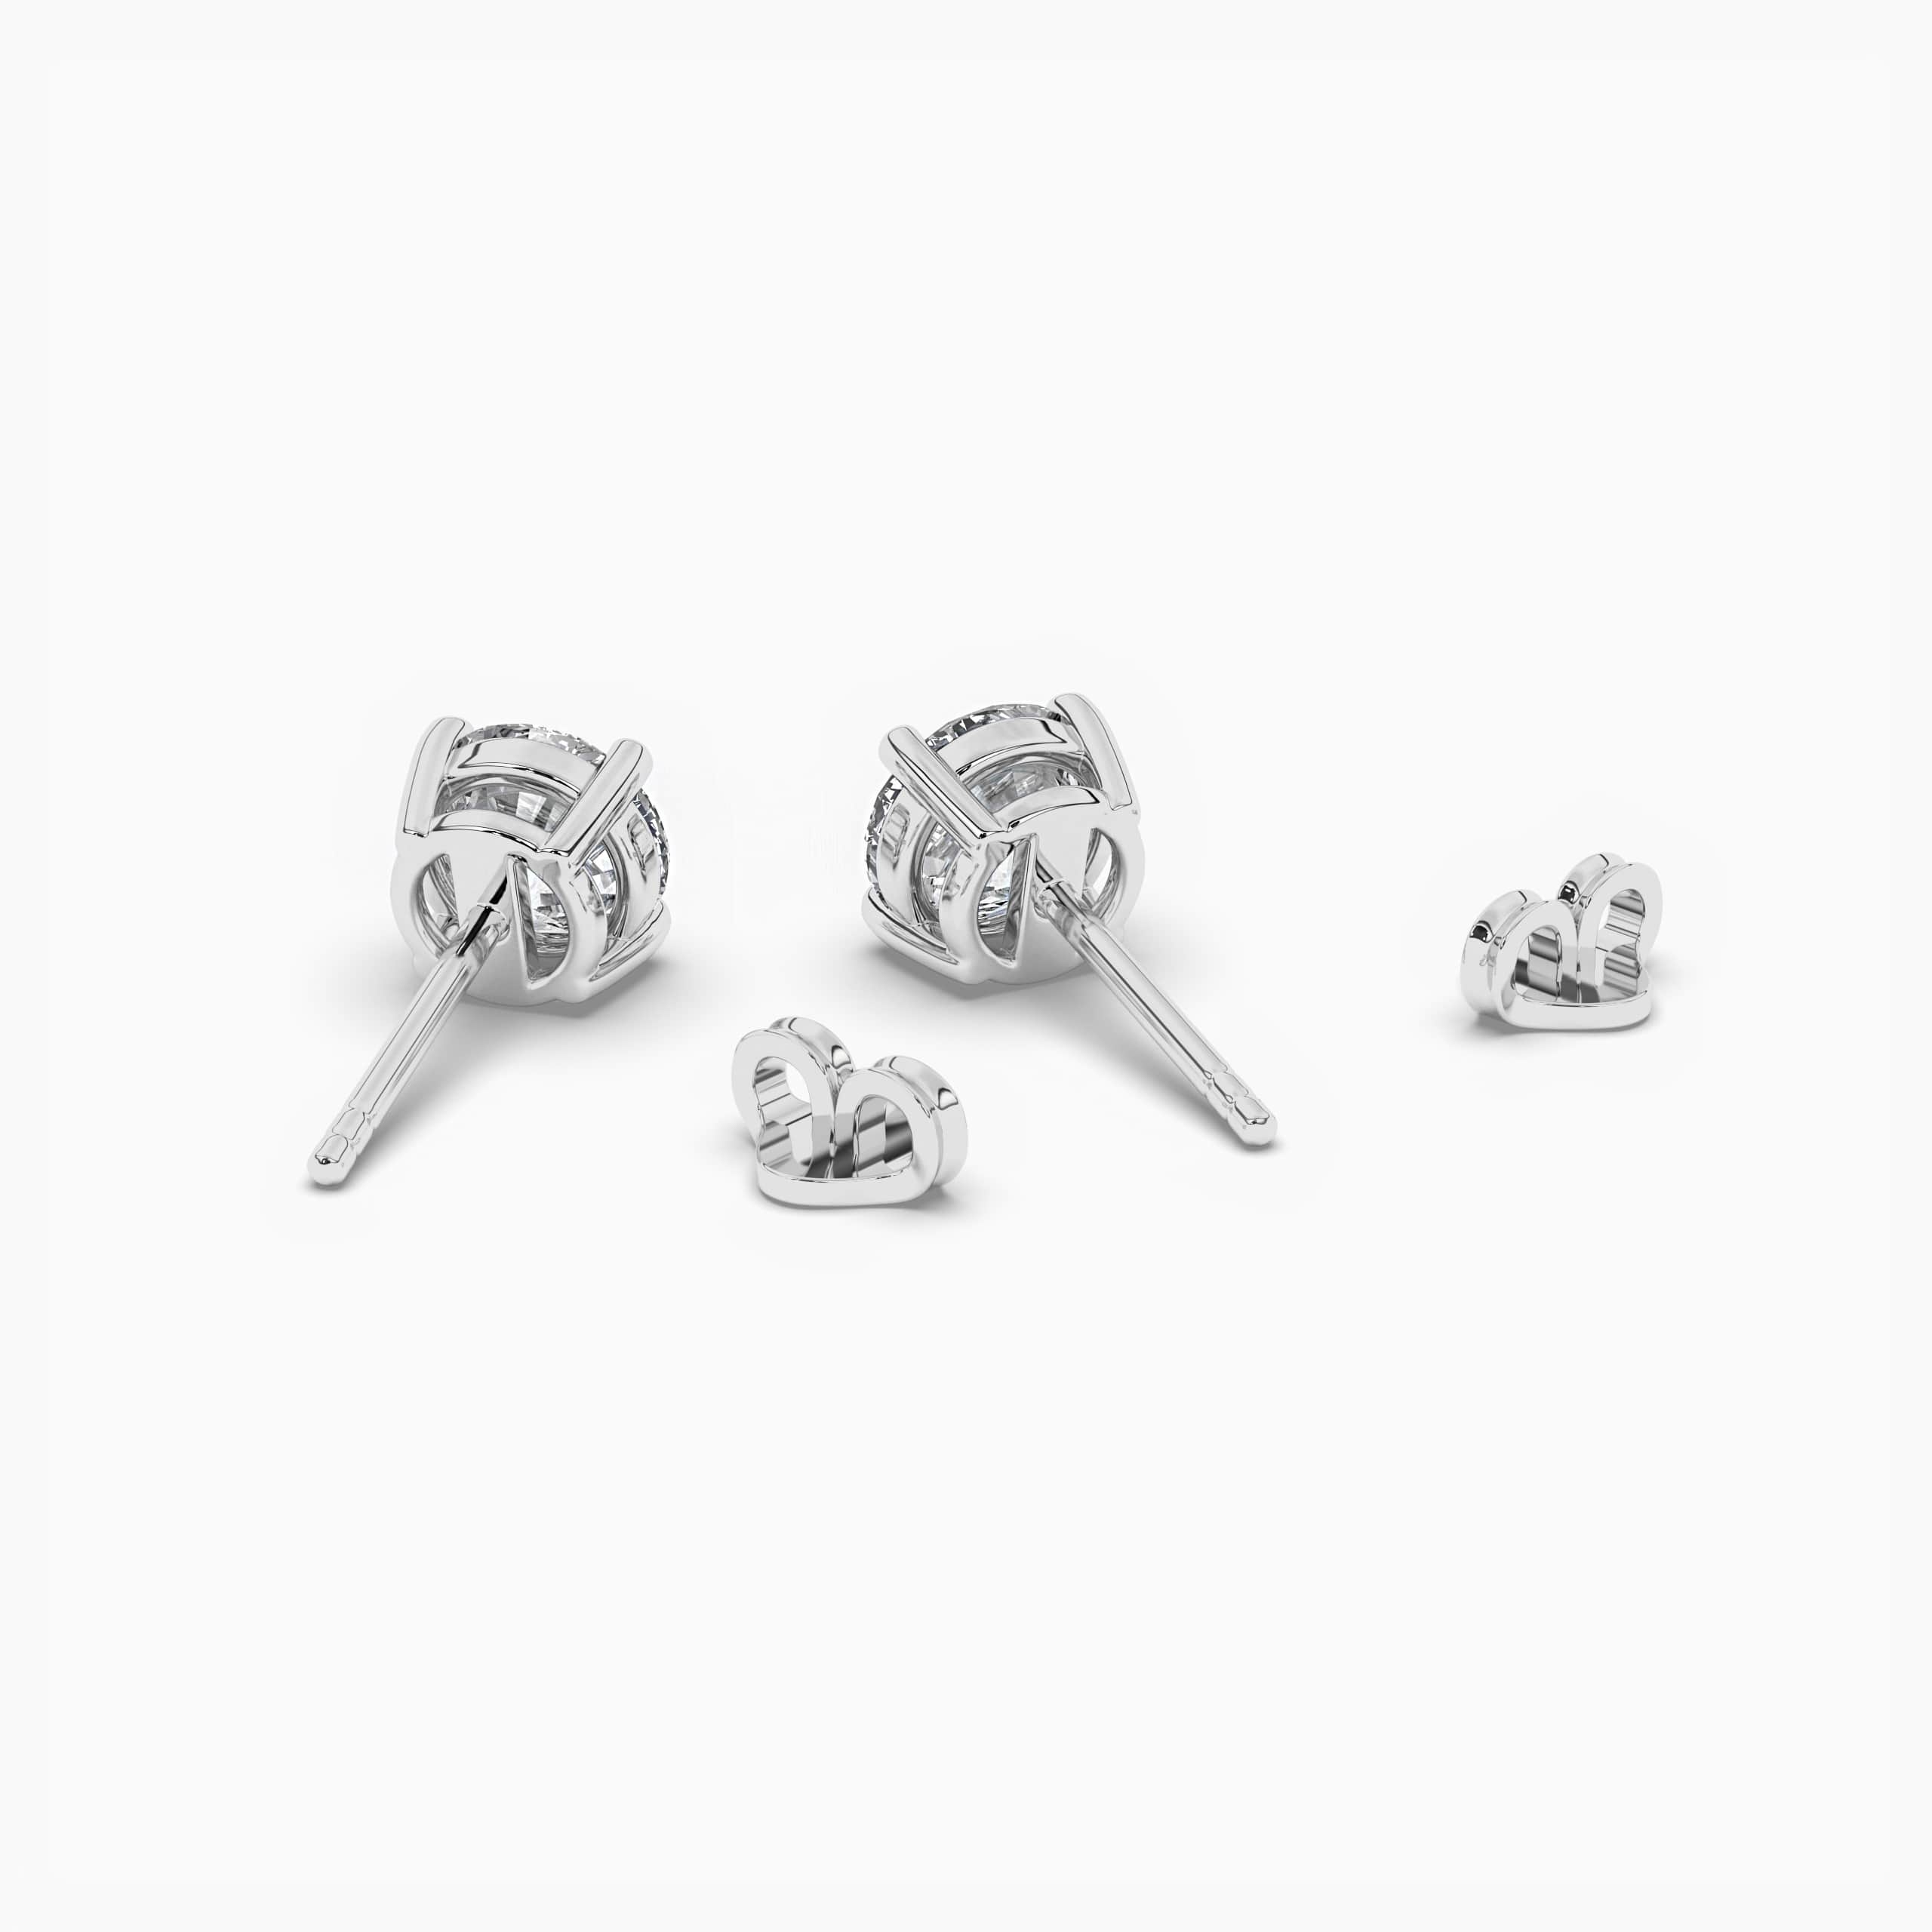 Round Cut Diamond Solitaire Stud Earrings in White